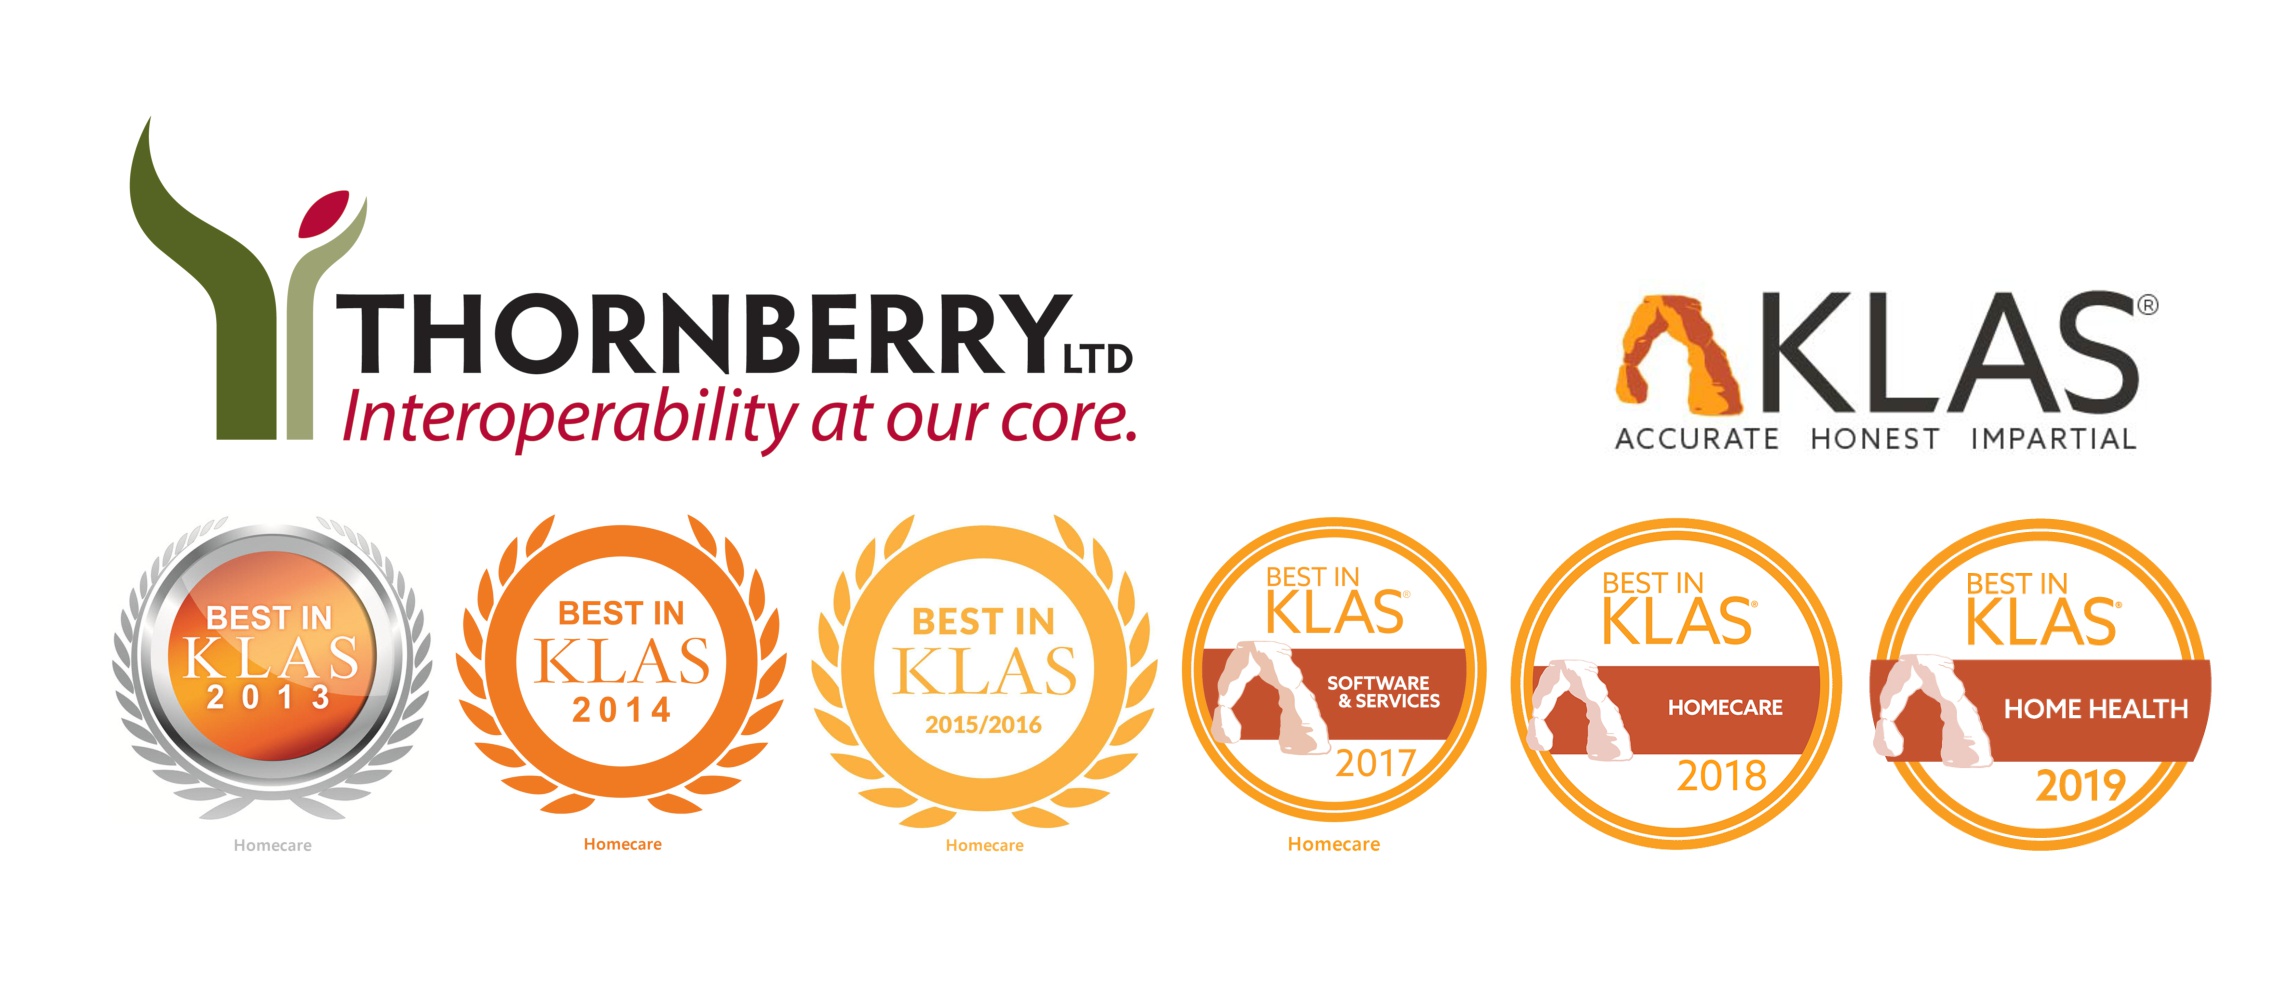 Thornberry Ltd. named Best in KLAS winner for Home Health for record-breaking six years in a row.